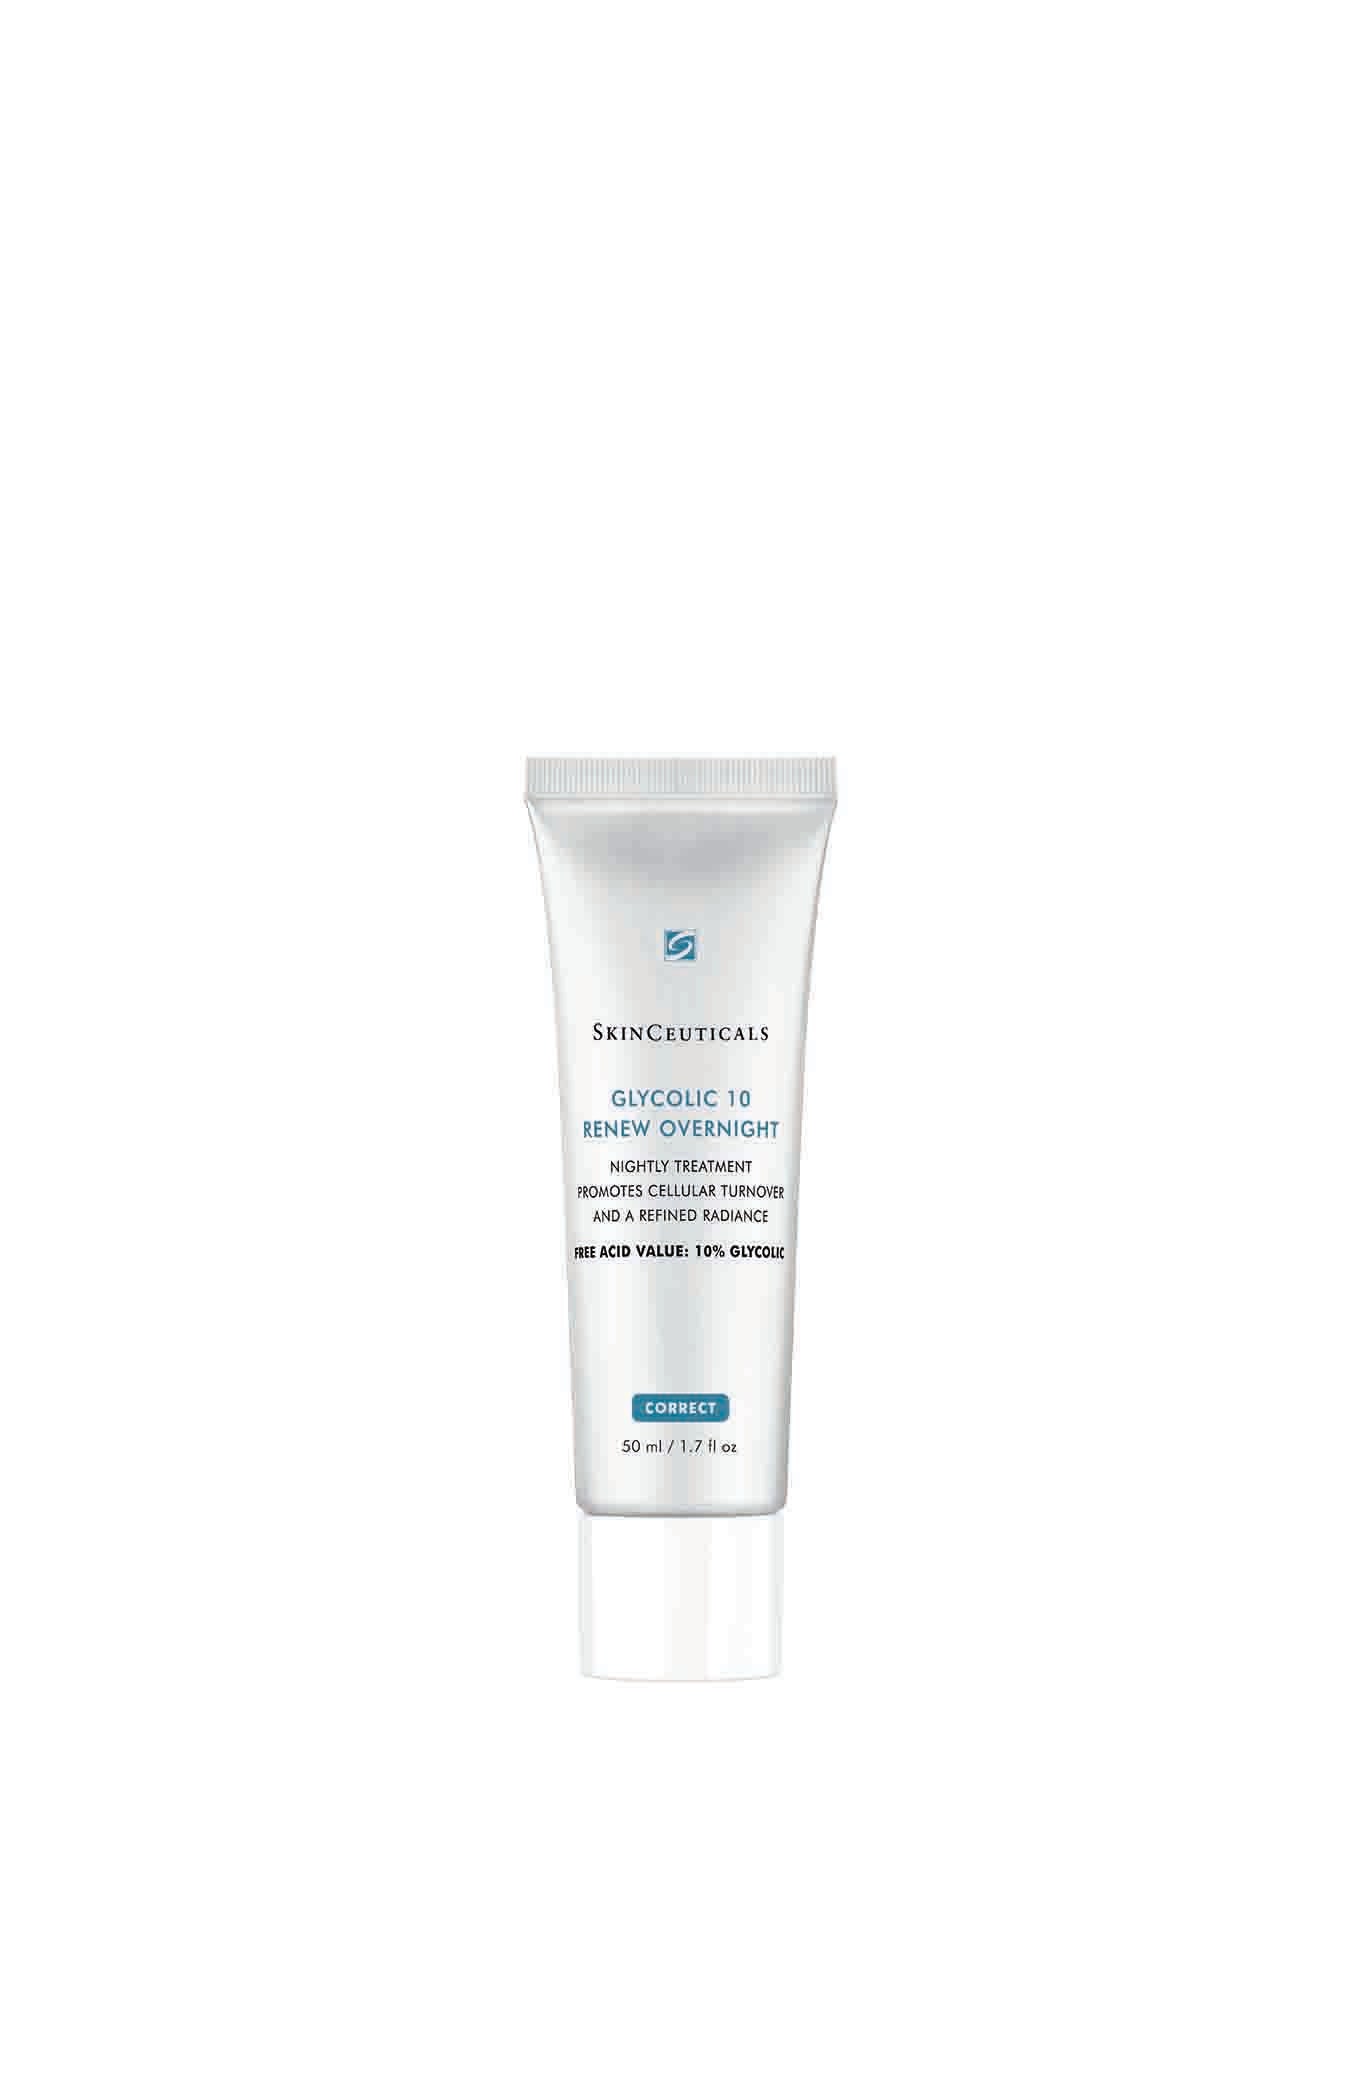 SkinCeuticals Glycolic 10 Overnight Clears Hyperpigmentation Without Irritation: Review